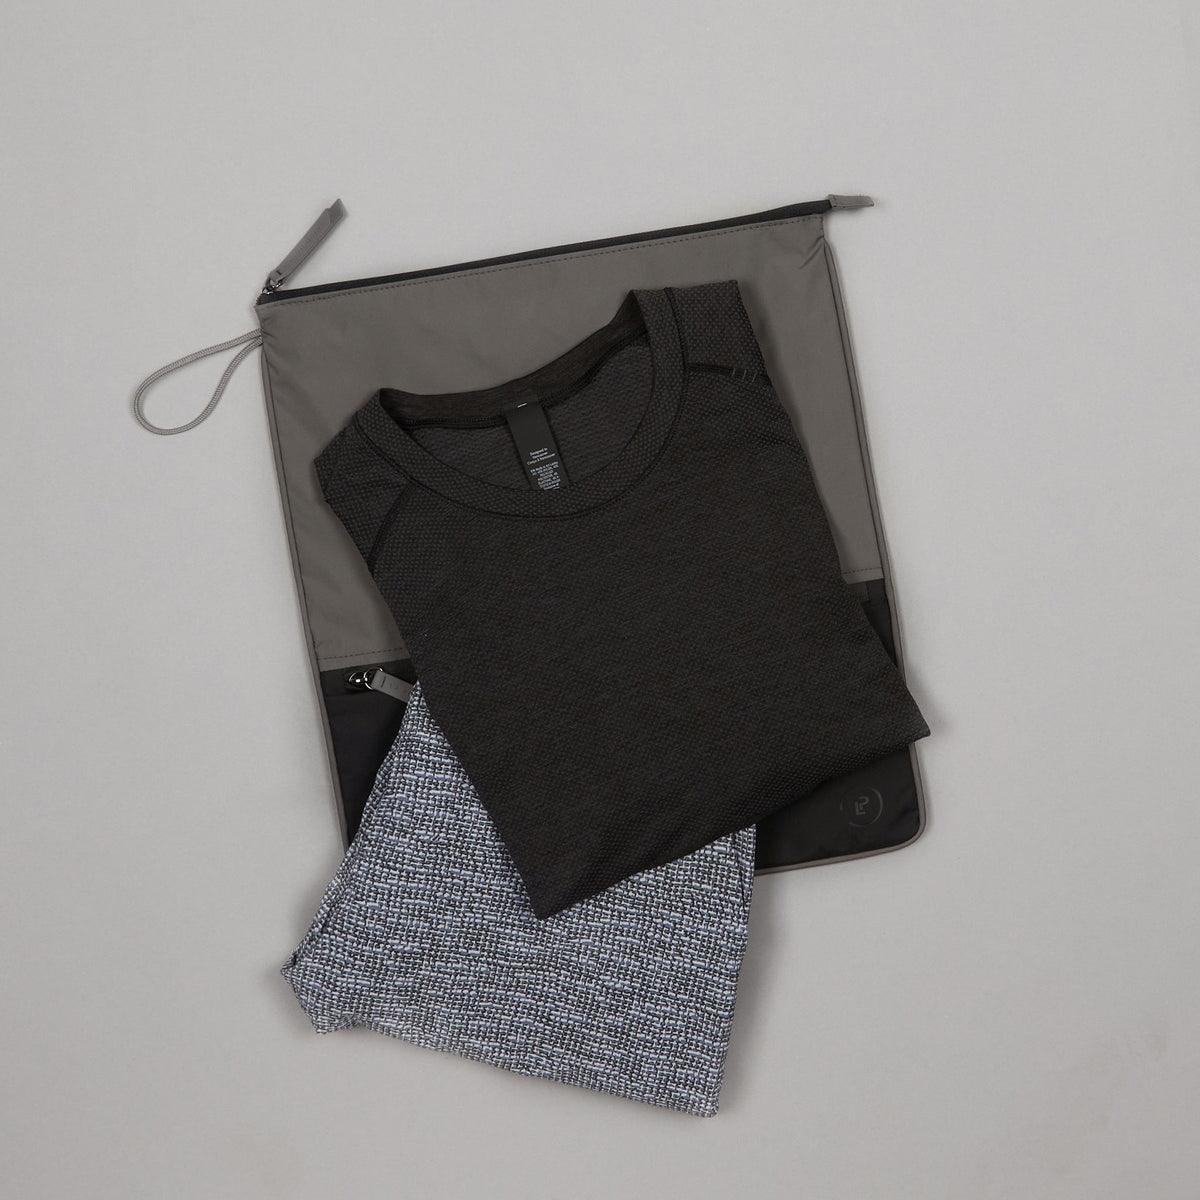 Pewter Ink Sweat Bag shown flat, with folded gym clothes